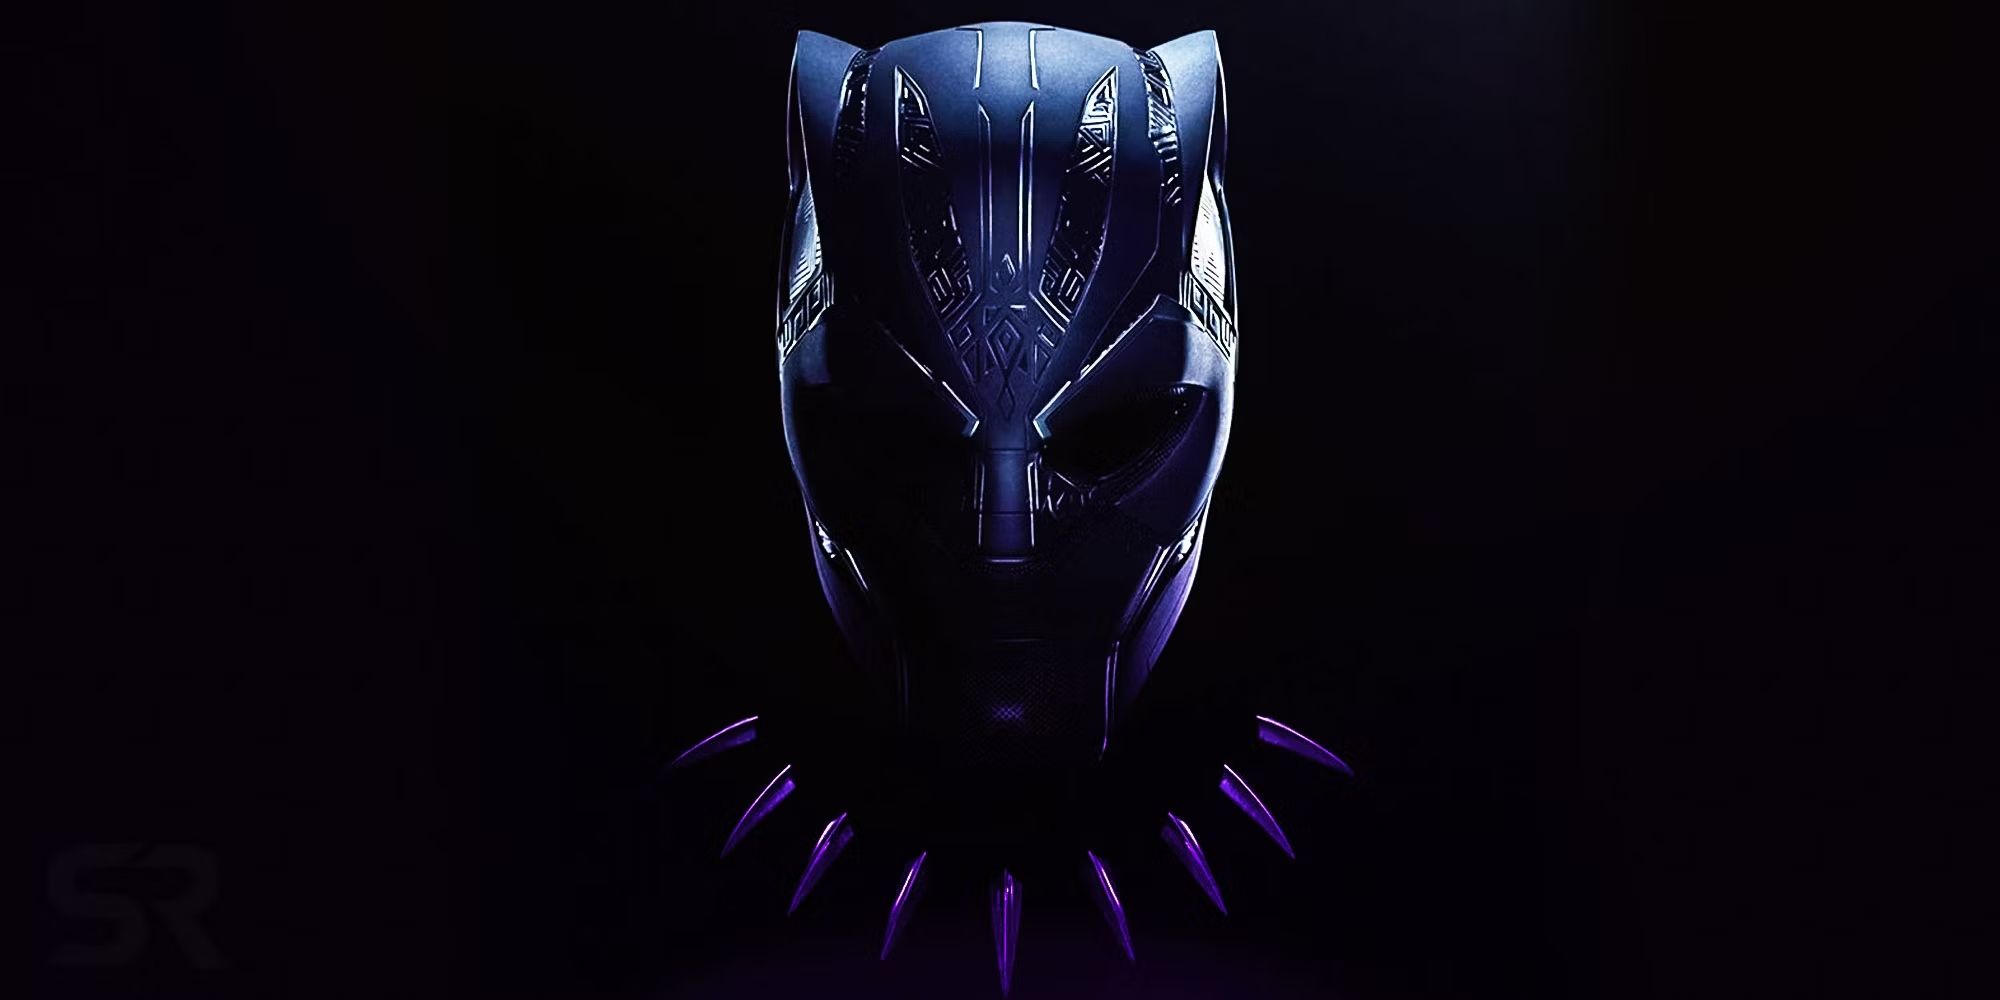 The Black Panther mask on a black background